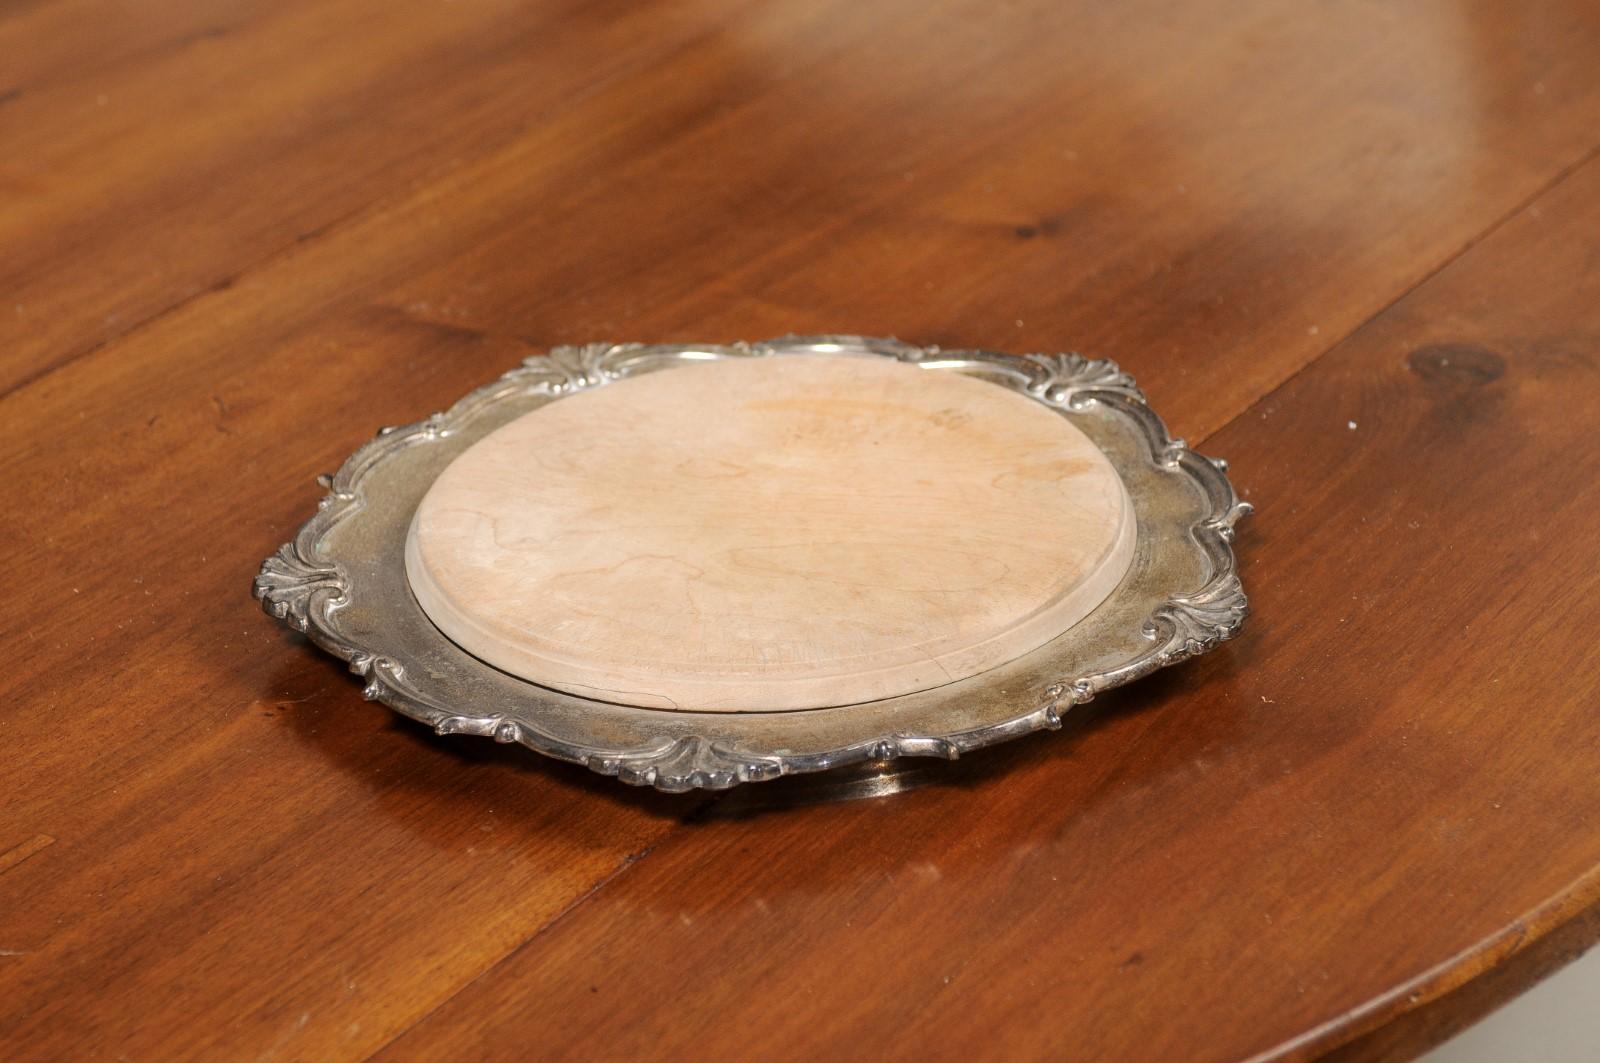 An English Victorian silver bread board from the 19th century, with scalloped edges and wooden removable cutting board. Created in England during the reign of Queen Victoria, this bread board features a circular silver exterior adorned with a